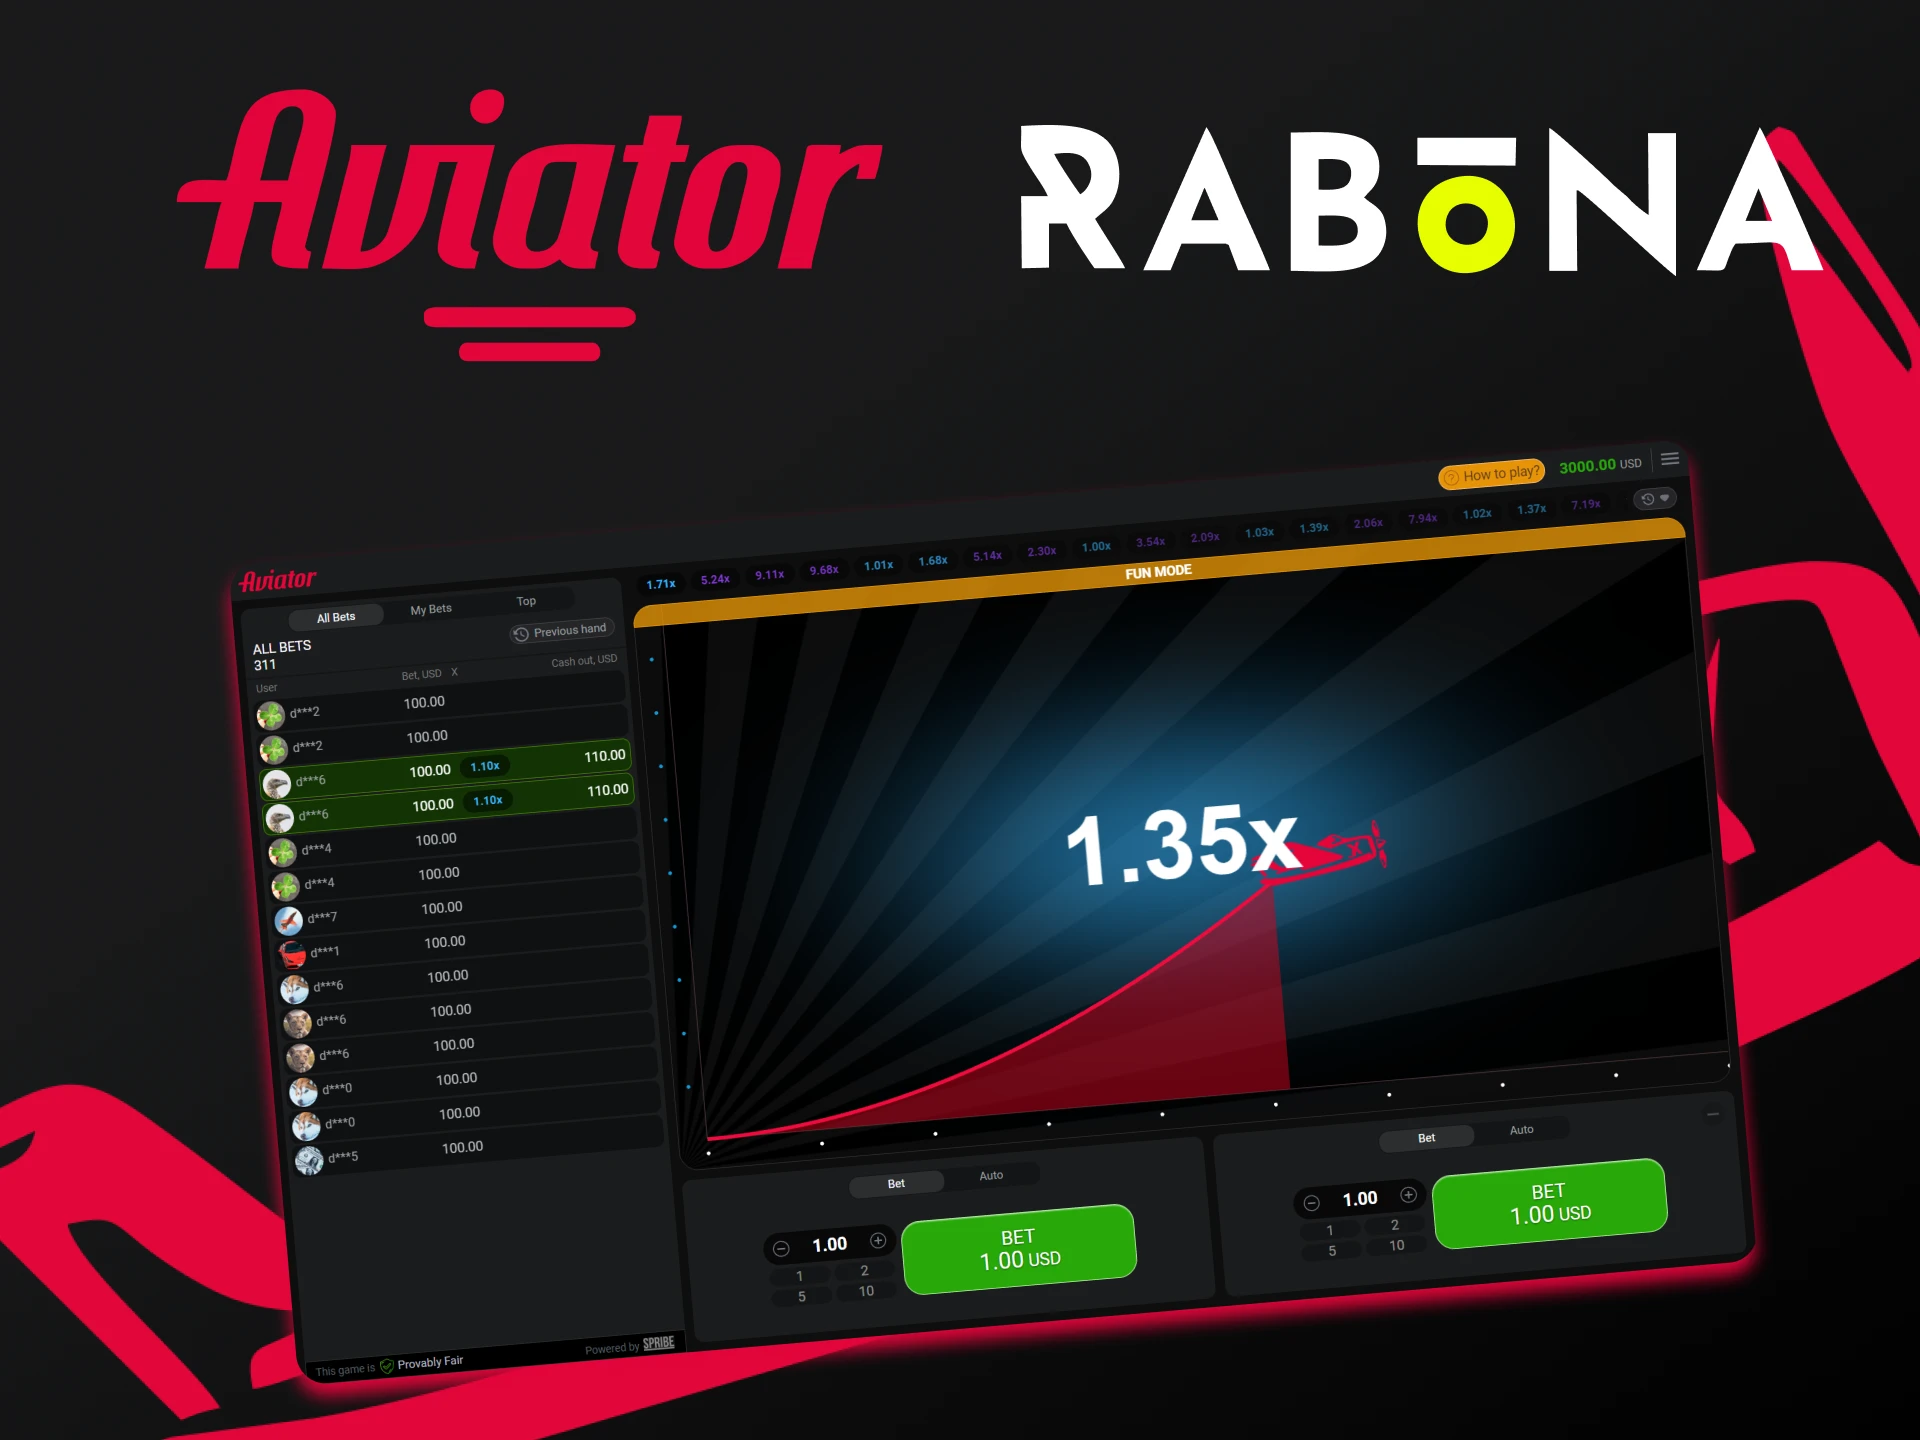 Find out what Aviator is on Rabona.